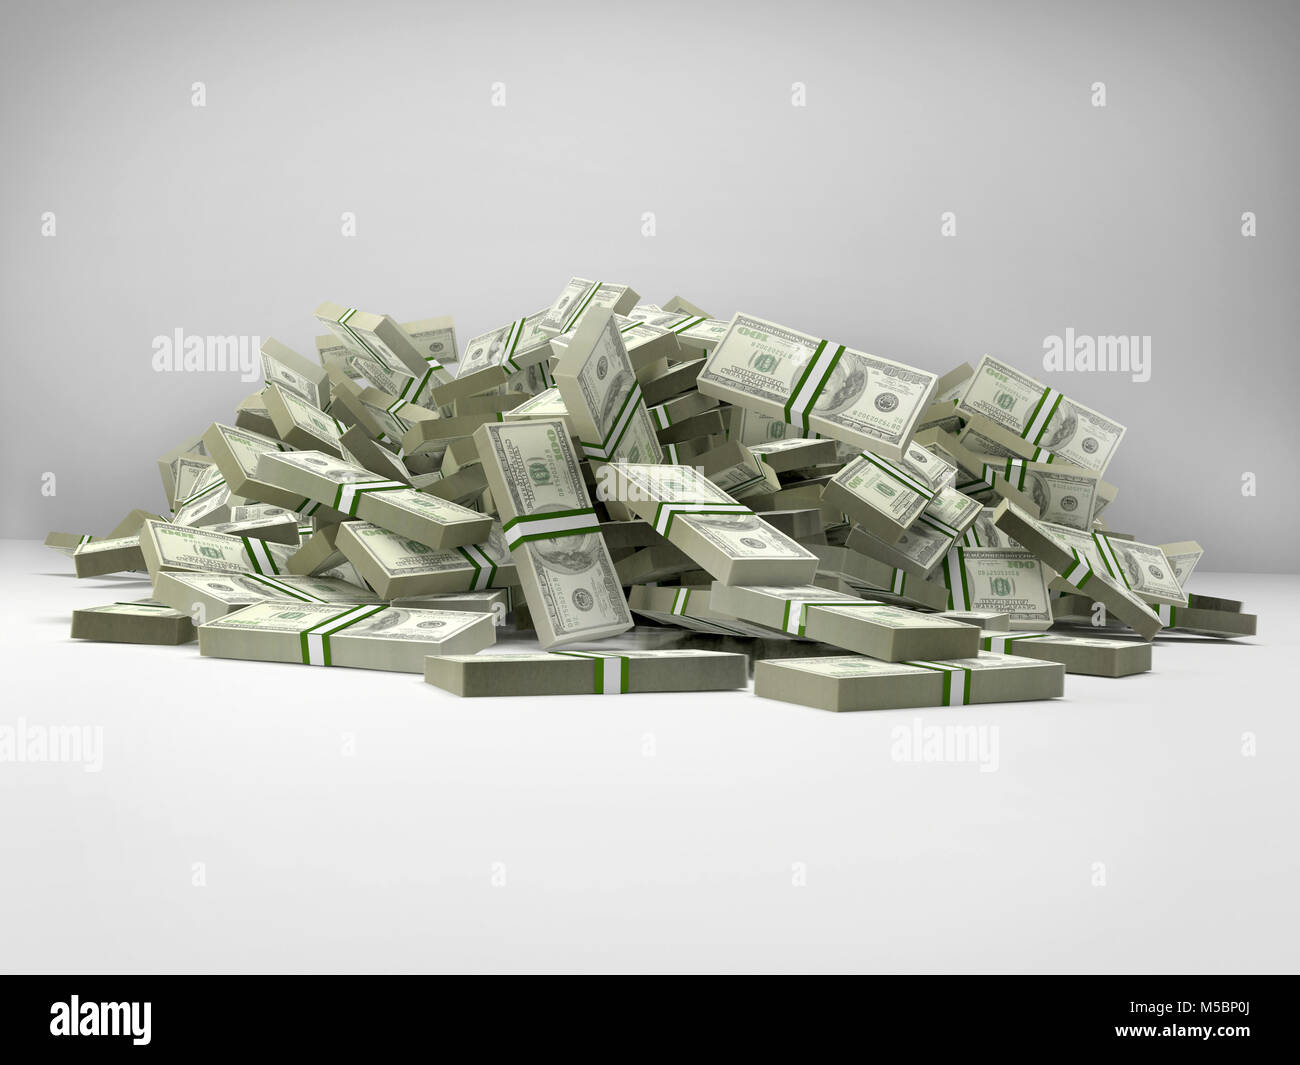 Pile of 100 dollar bill wads on white Stock Photo